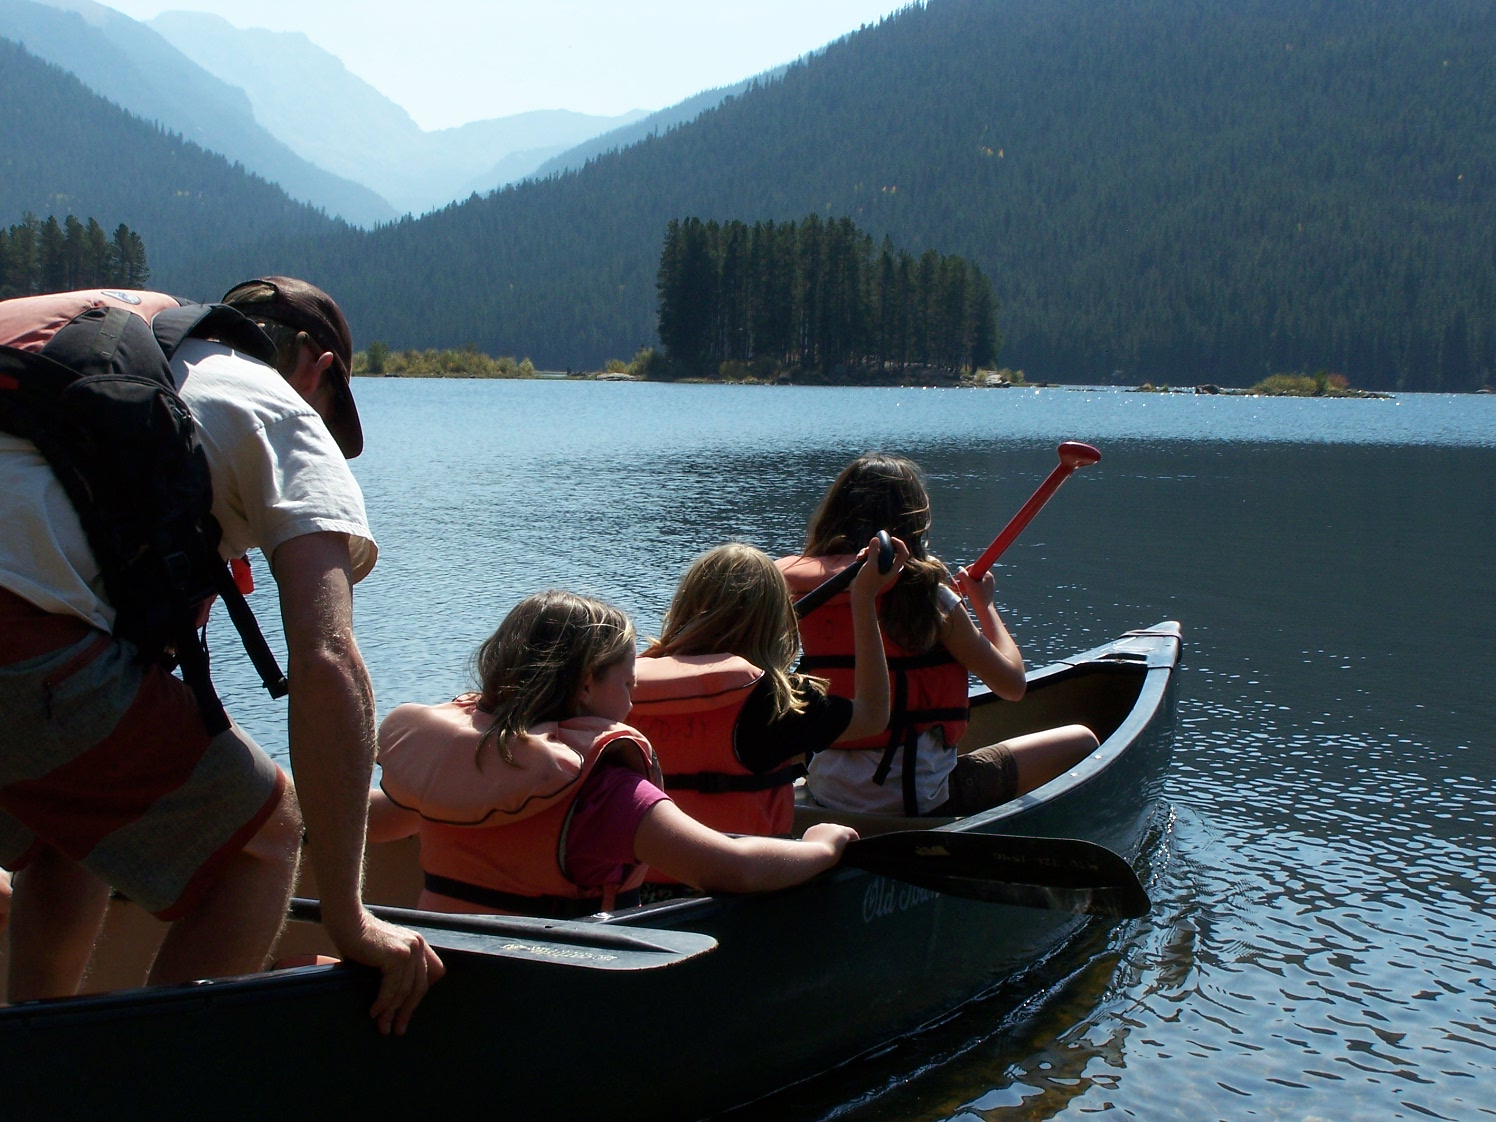 Canoeing on lakes in Arapaho National Recreation Area.